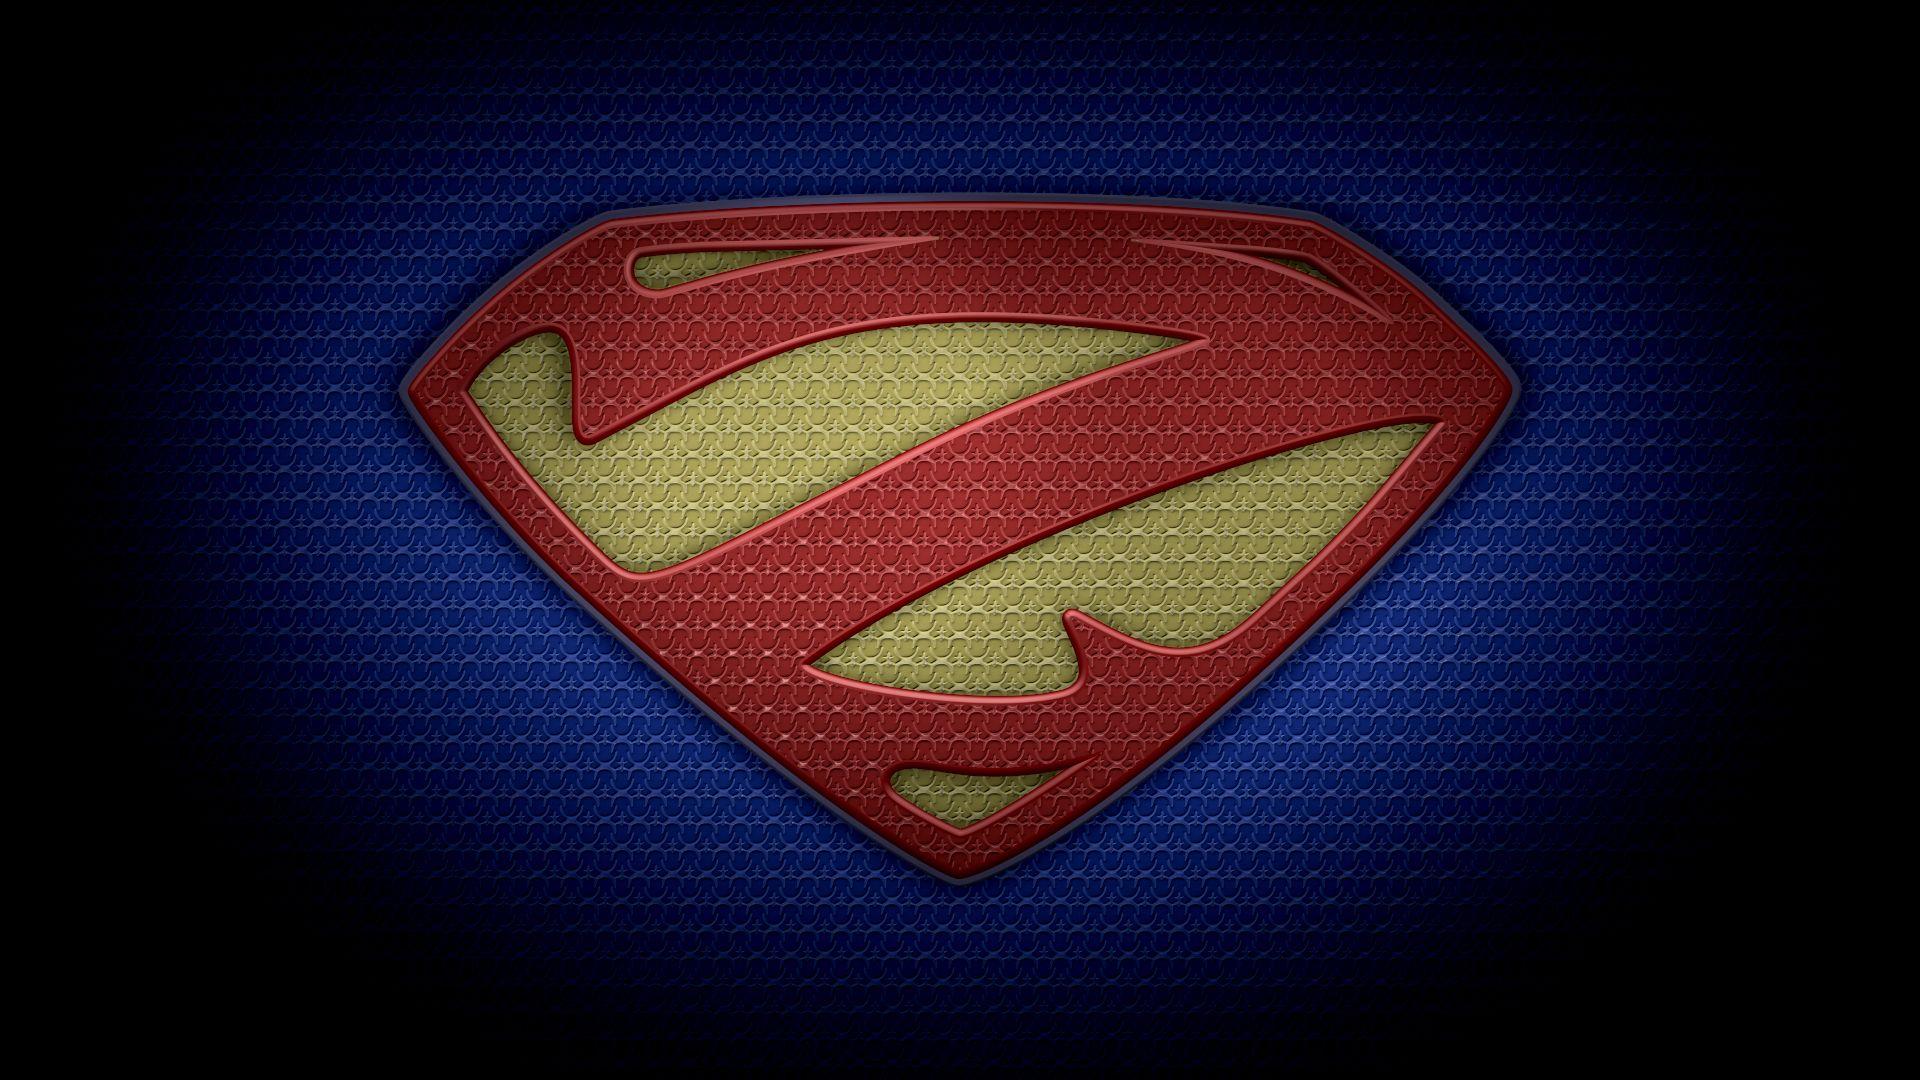 The letter Y in the style of “Man of Steel”